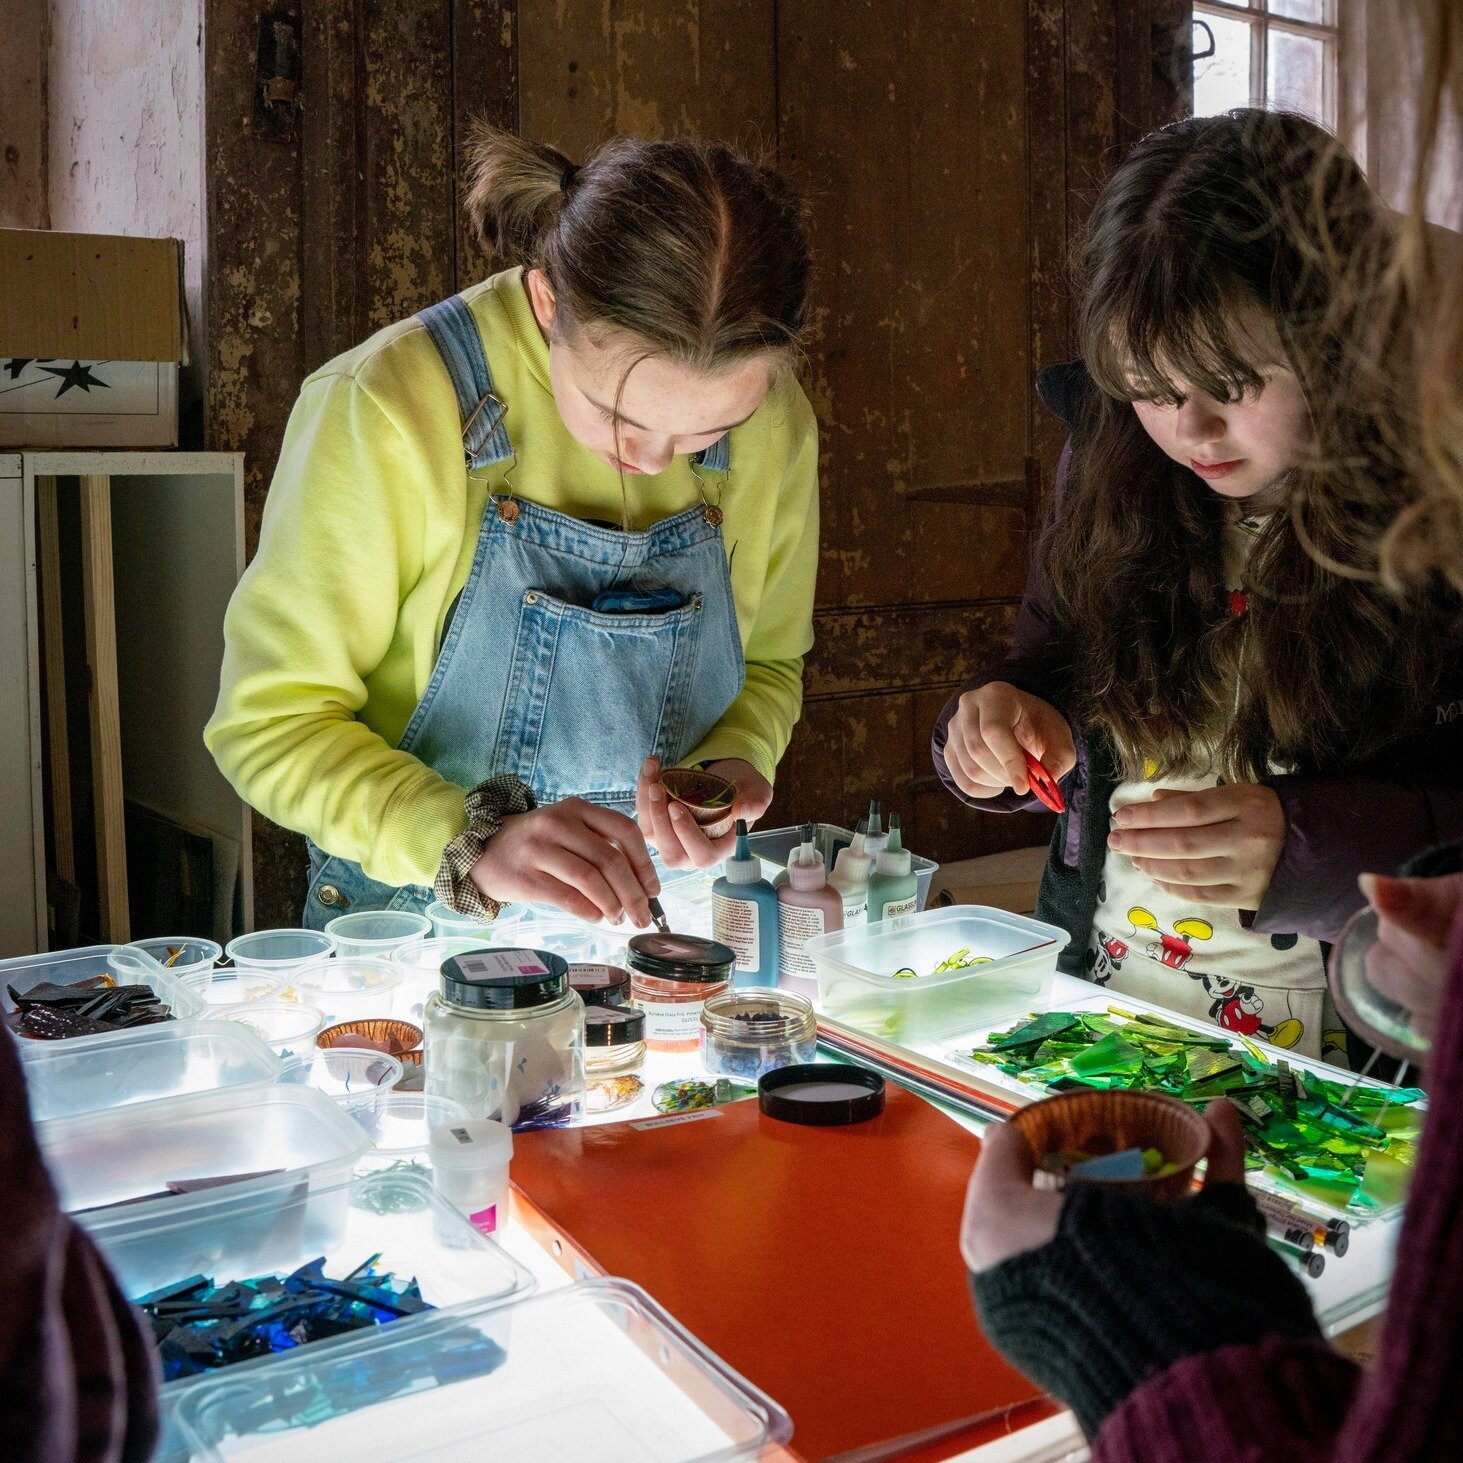 Aged 13-18 and love art? Want to see your work exhibited at Somerset House in London? We're looking for participants for our free Saturday Art Club (part of the @natsatclub scheme). Registration is now open! Visit our website to find out more and sig